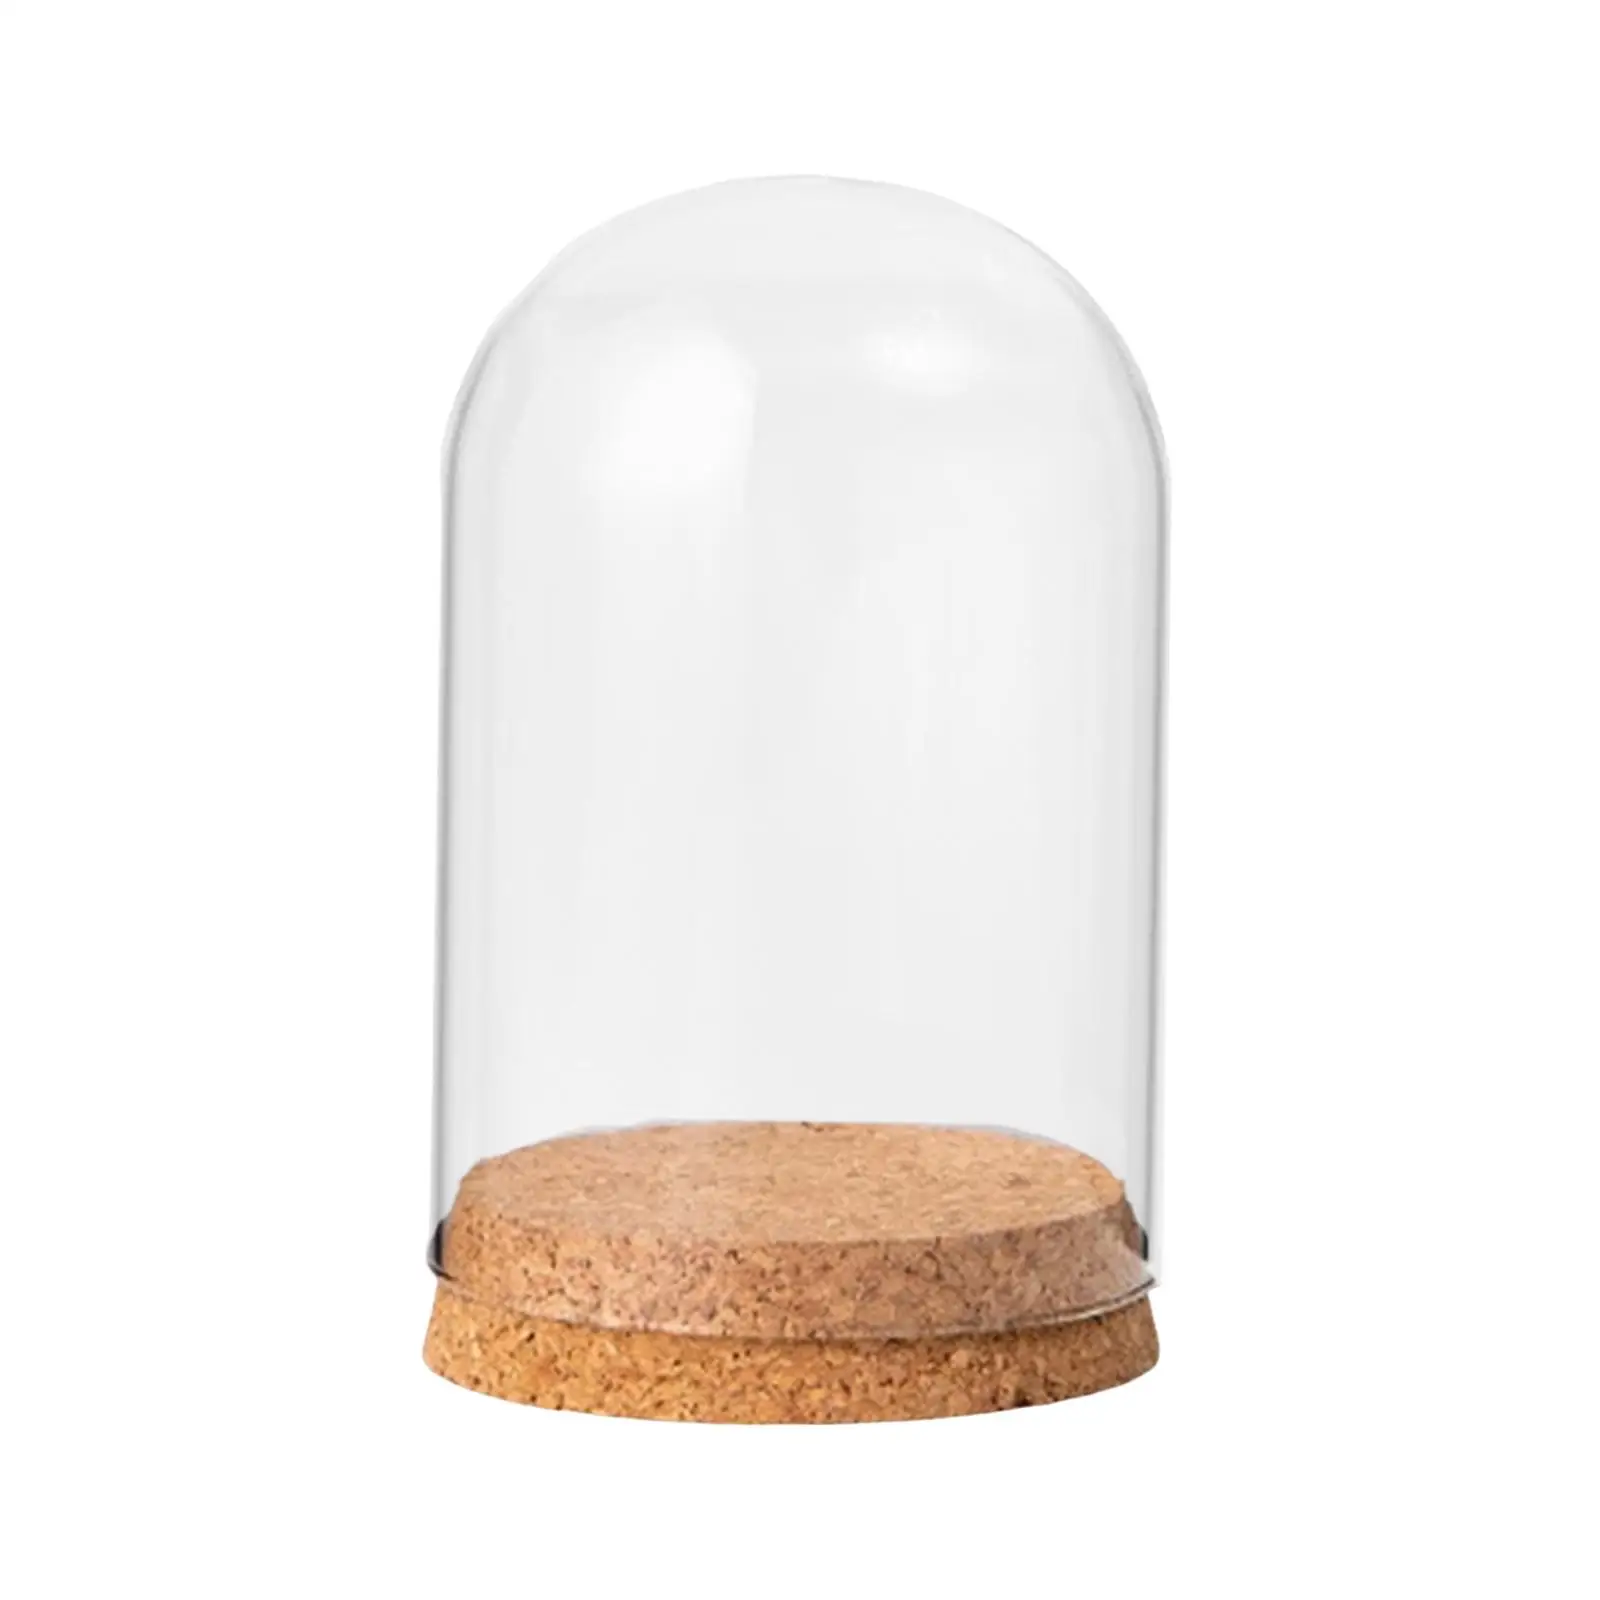 Cloche Bell Jar Display Dome Case DIY Container Ornament Dome Cloche Cover for Party Desktop Home Office Decoration